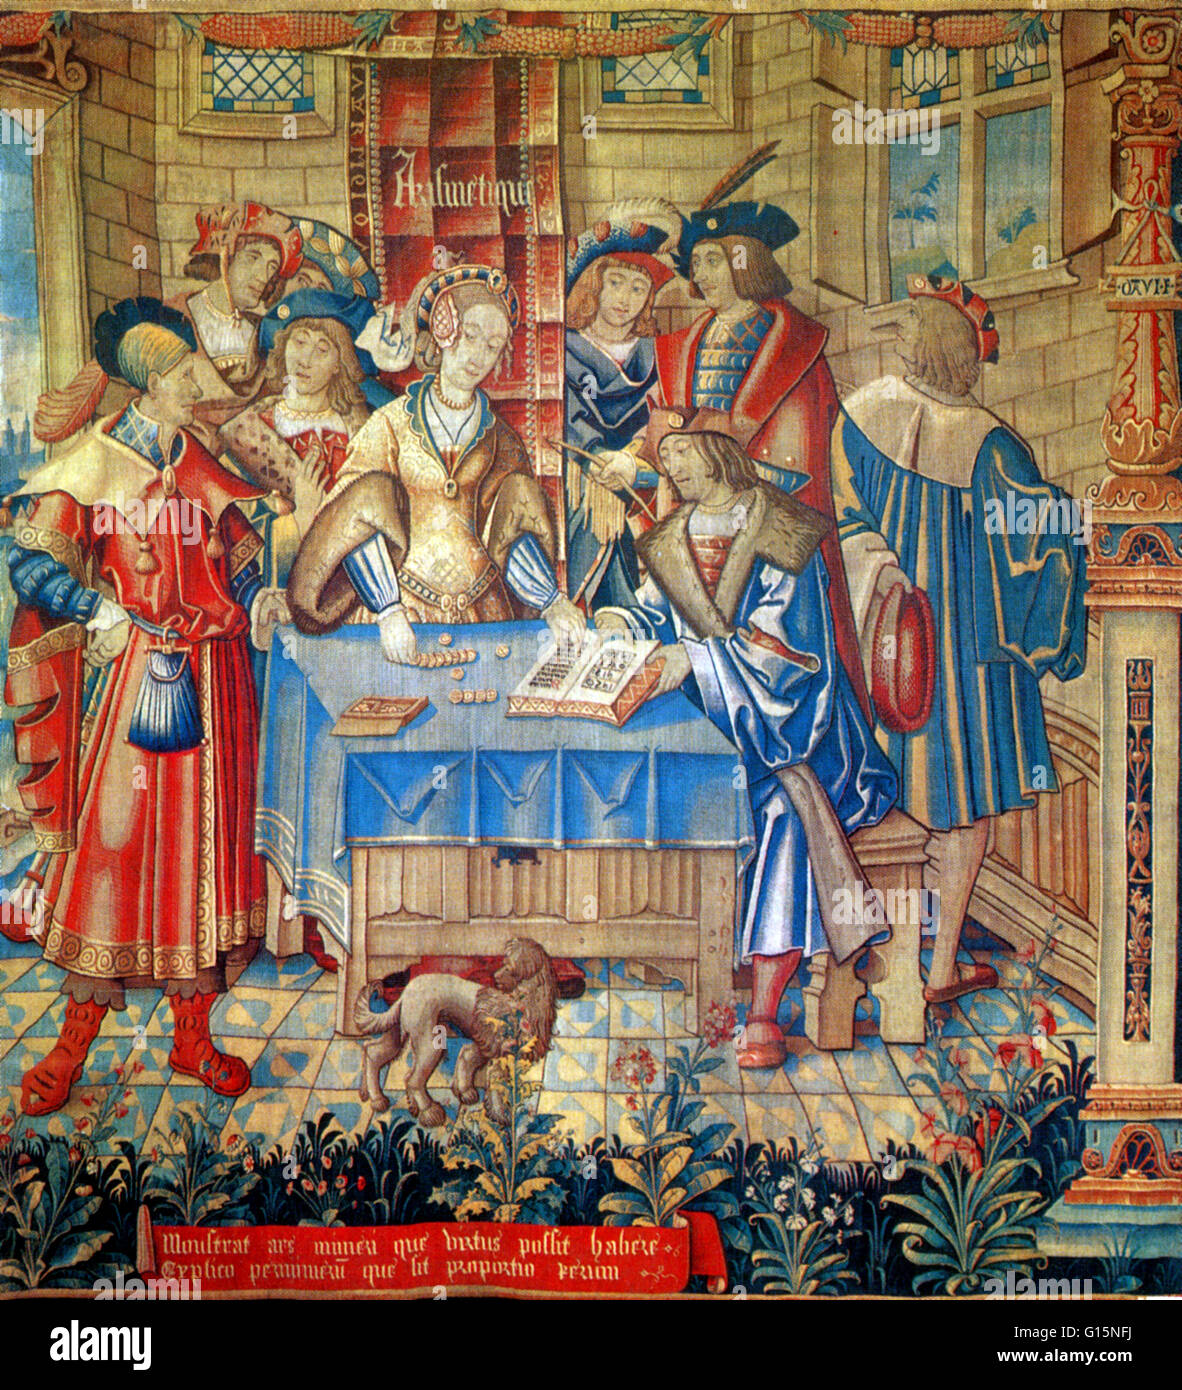 Tapestry of Liberal Arts, The Arithmetic, Tapestries in the National Museum of the Middle Ages, 1520. Arithmetic is the most elementary branch of mathematics, used for tasks ranging from simple day-to-day counting to advanced science and business calculat Stock Photo